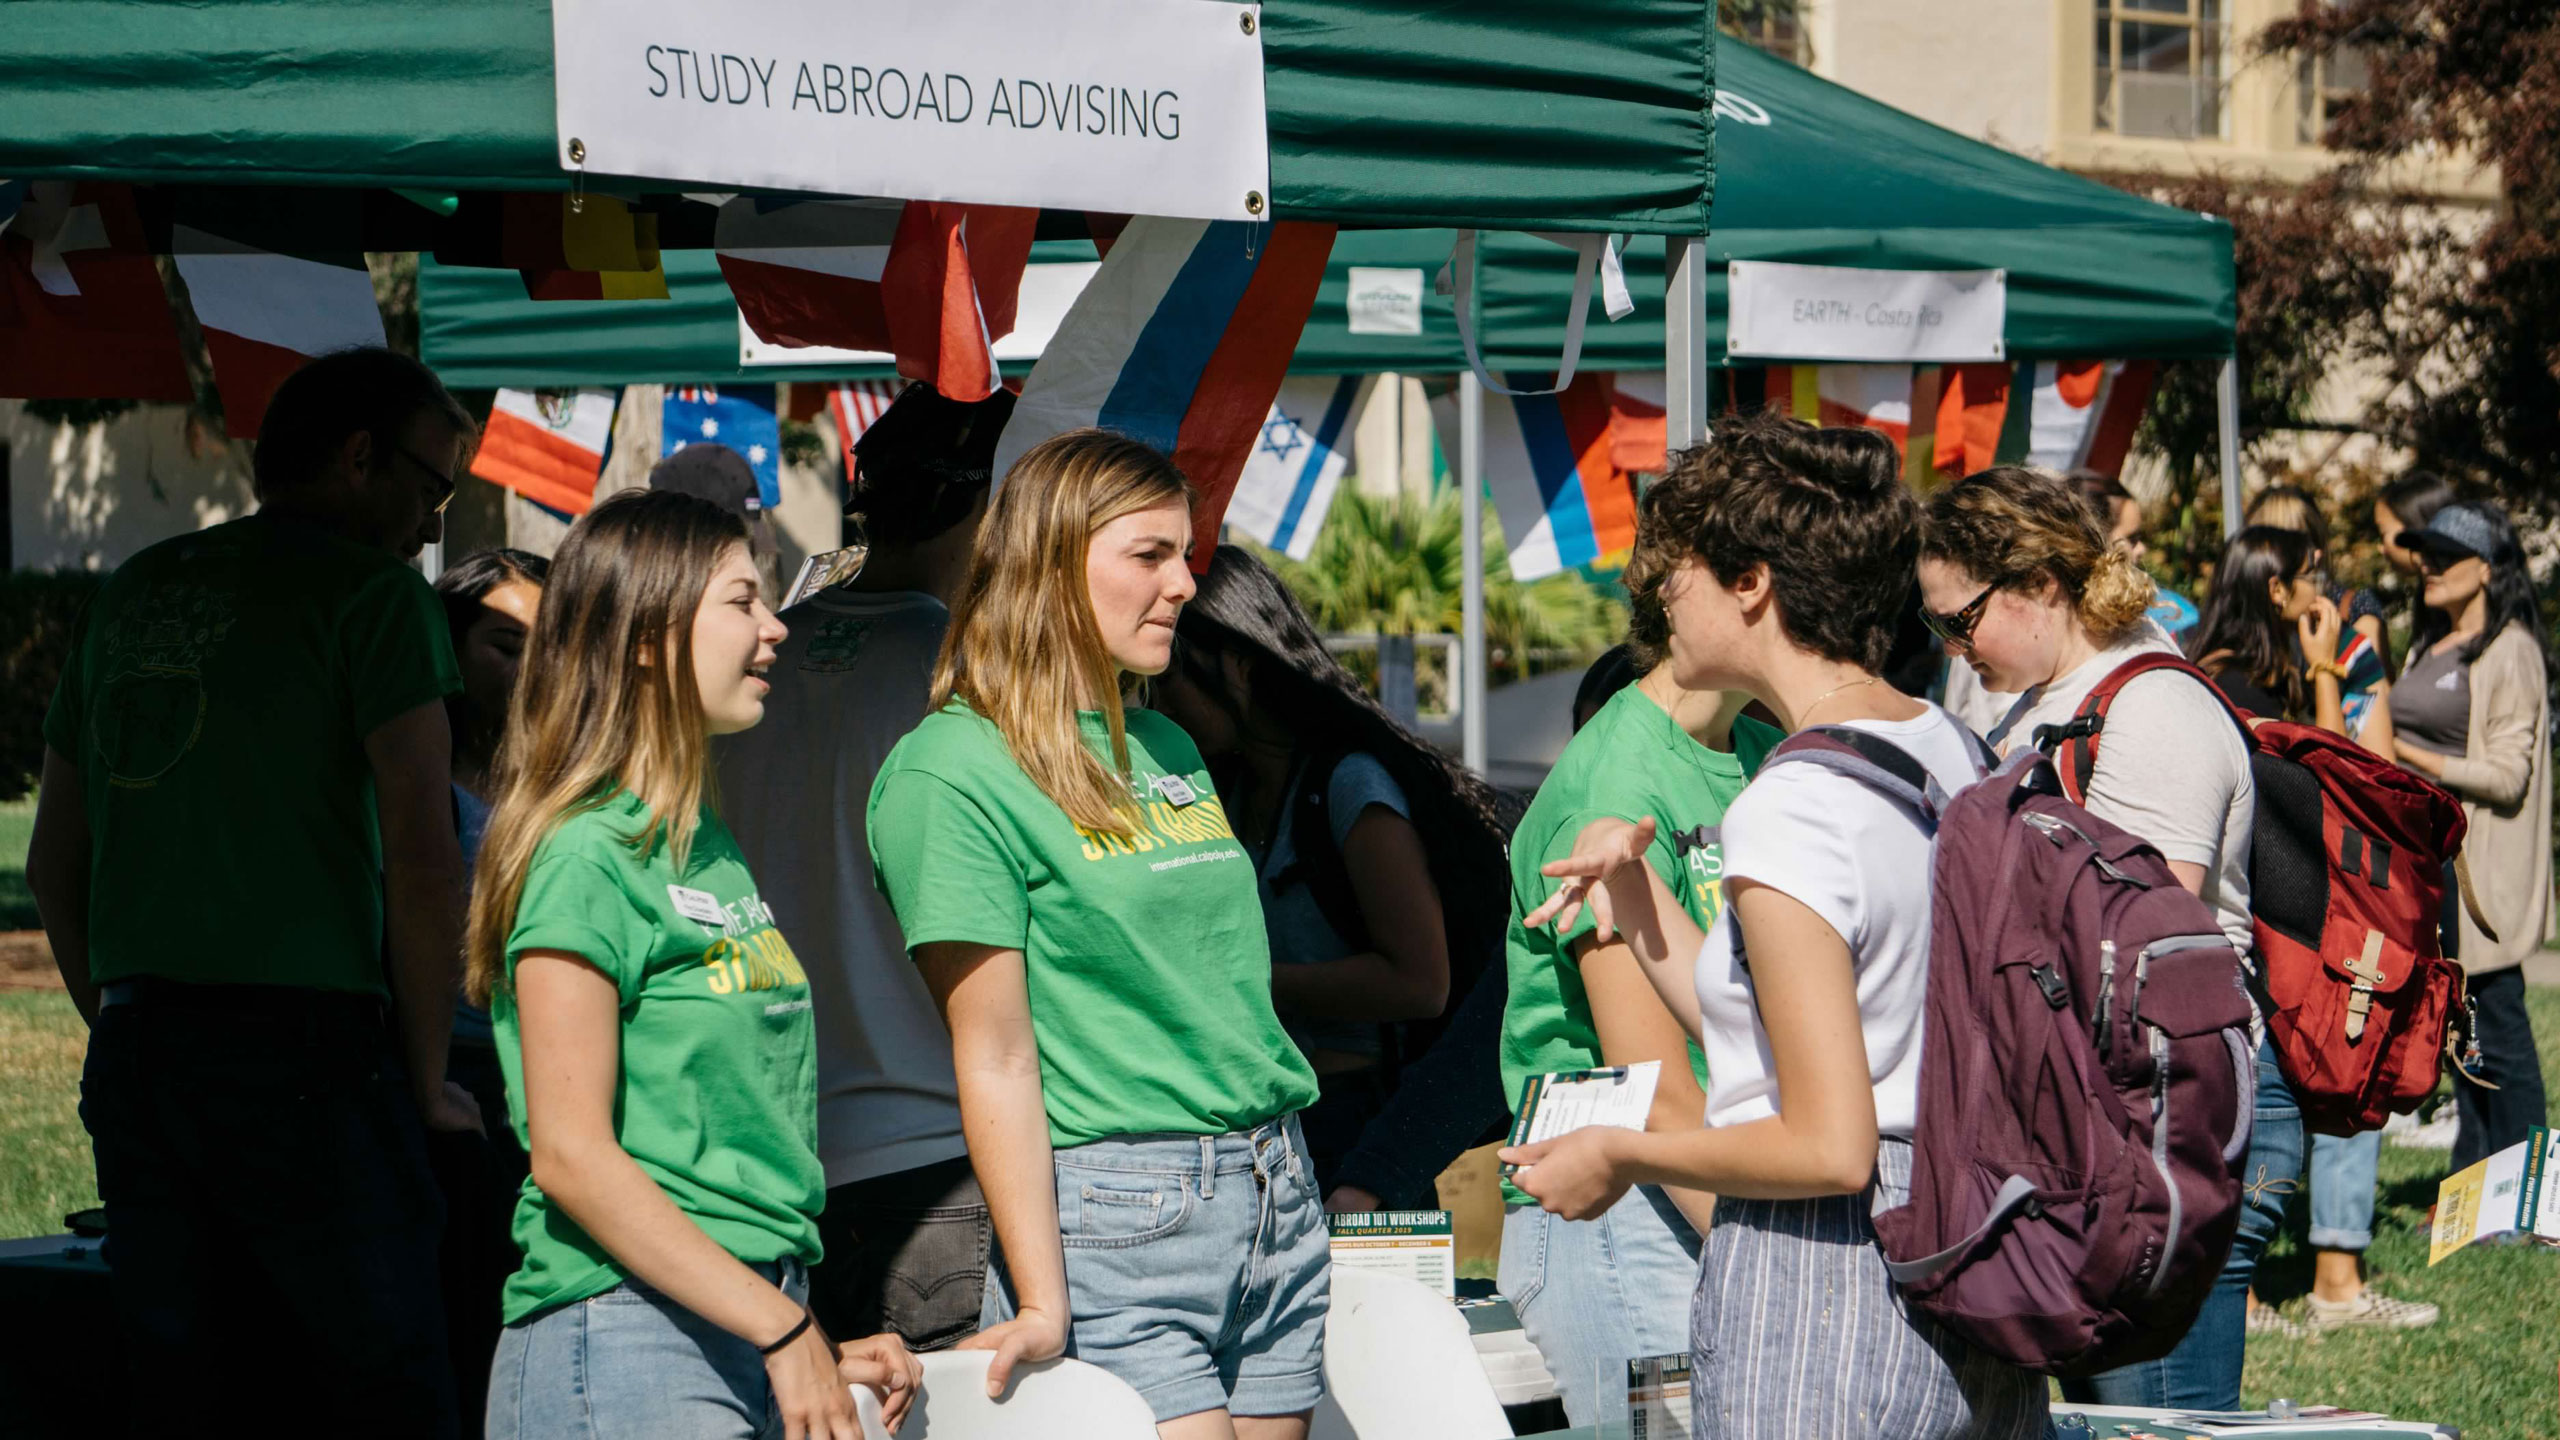 2019 Study Abroad Fair, student interns discuss study abroad programs with attendees.